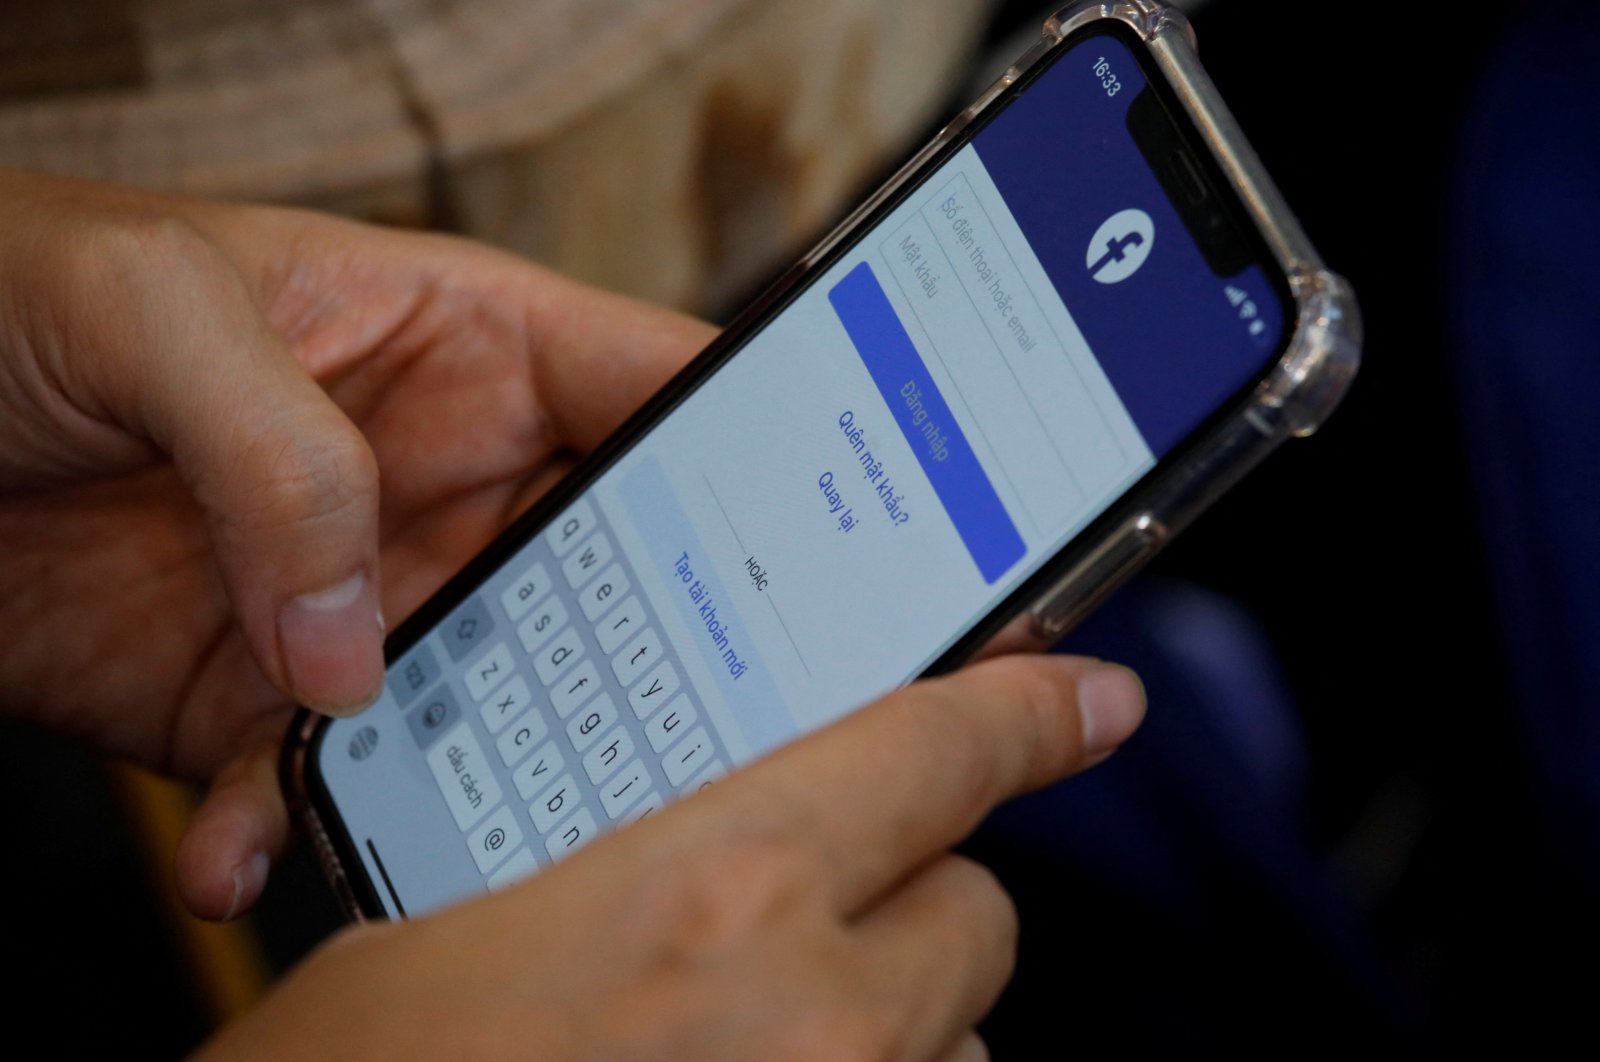 A Facebook user logs in on his mobile at a cafe in Hanoi, Vietnam, Nov. 19, 2020. (Reuters Photo)